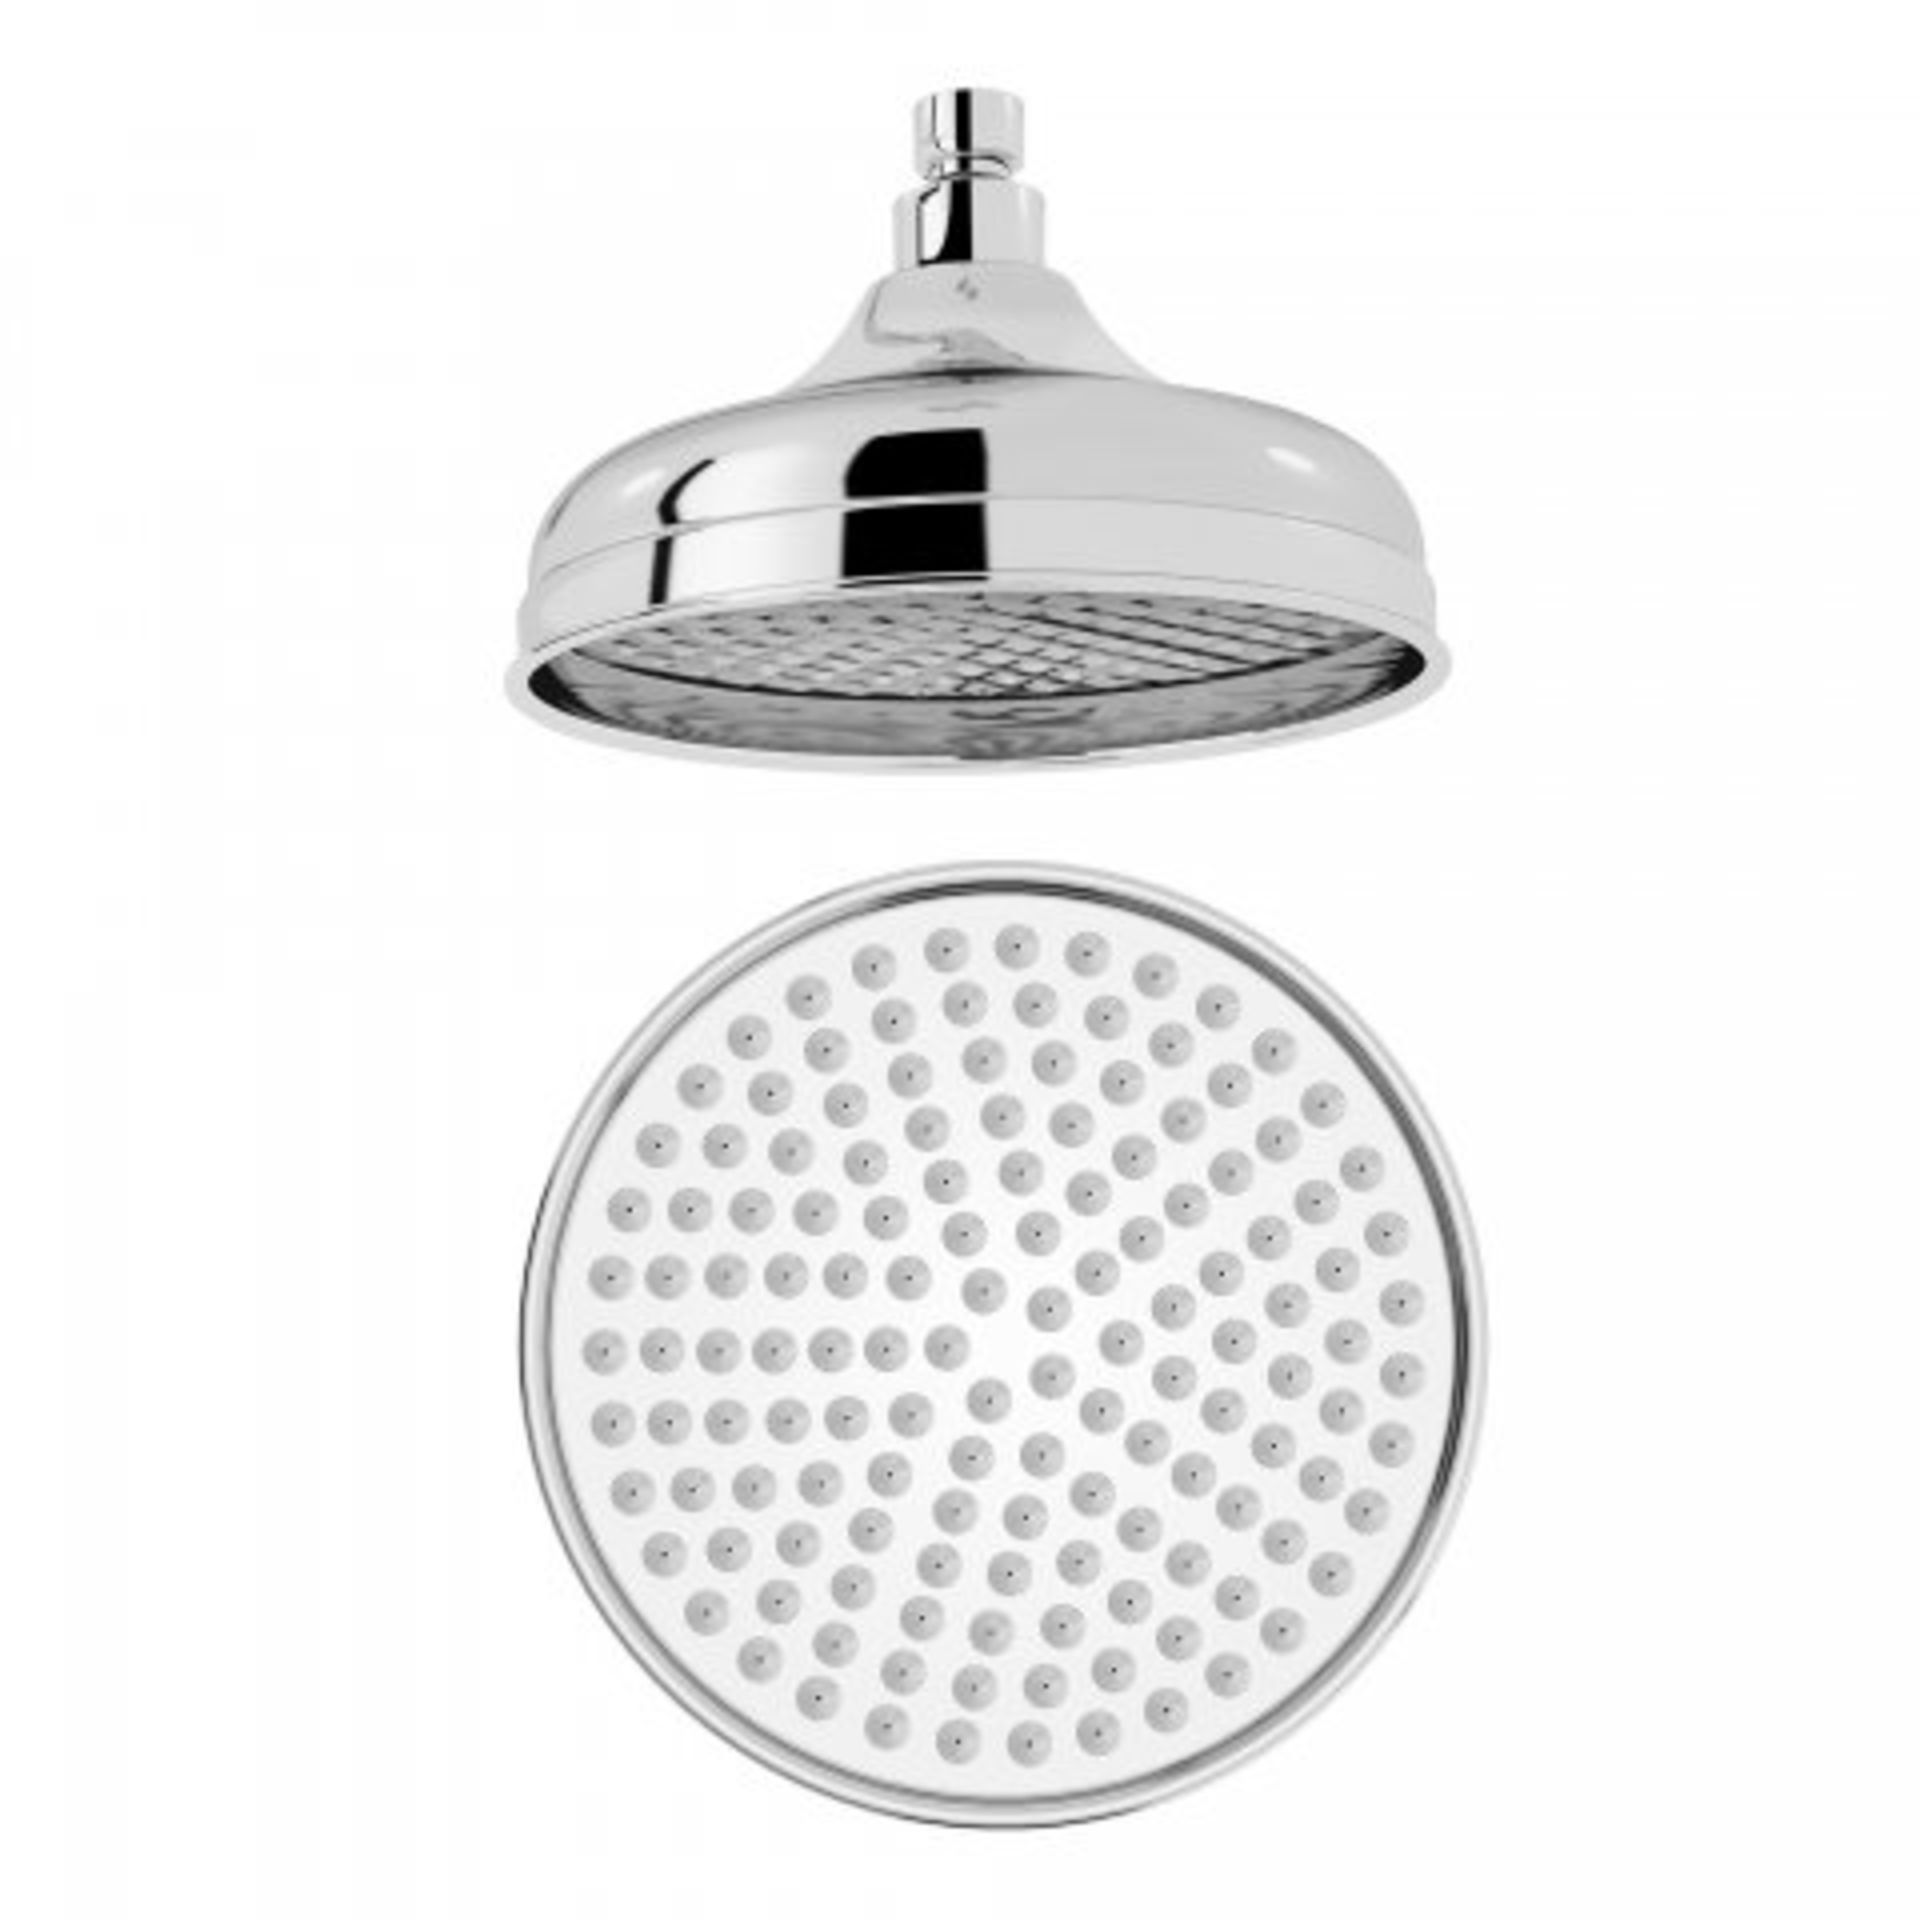 (J18) 205mm Traditional Rain Chrome Plated Solid Brass Shower Head - Finest Range Our stunning 205mm - Image 2 of 3